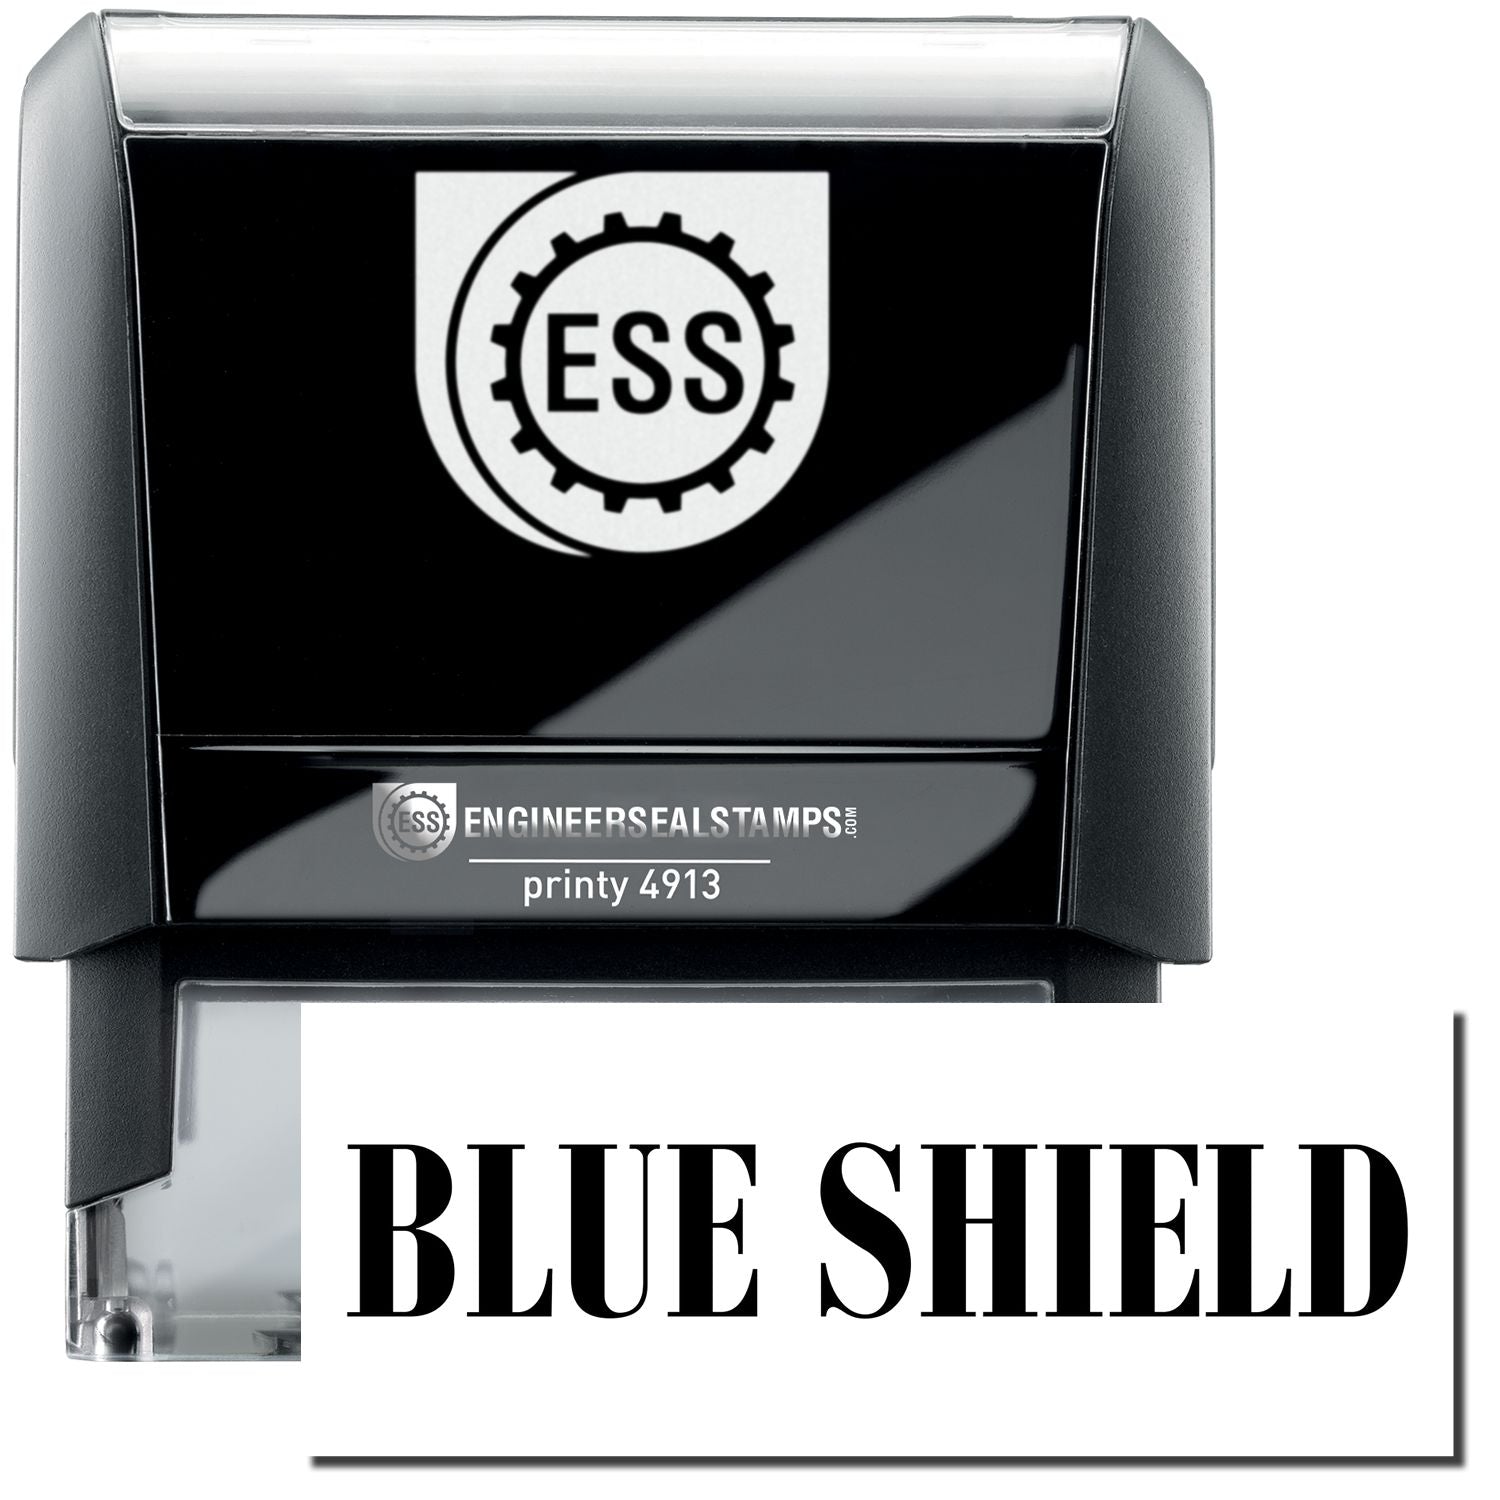 A self-inking stamp with a stamped image showing how the text "BLUE SHIELD" in a large bold font is displayed by it.